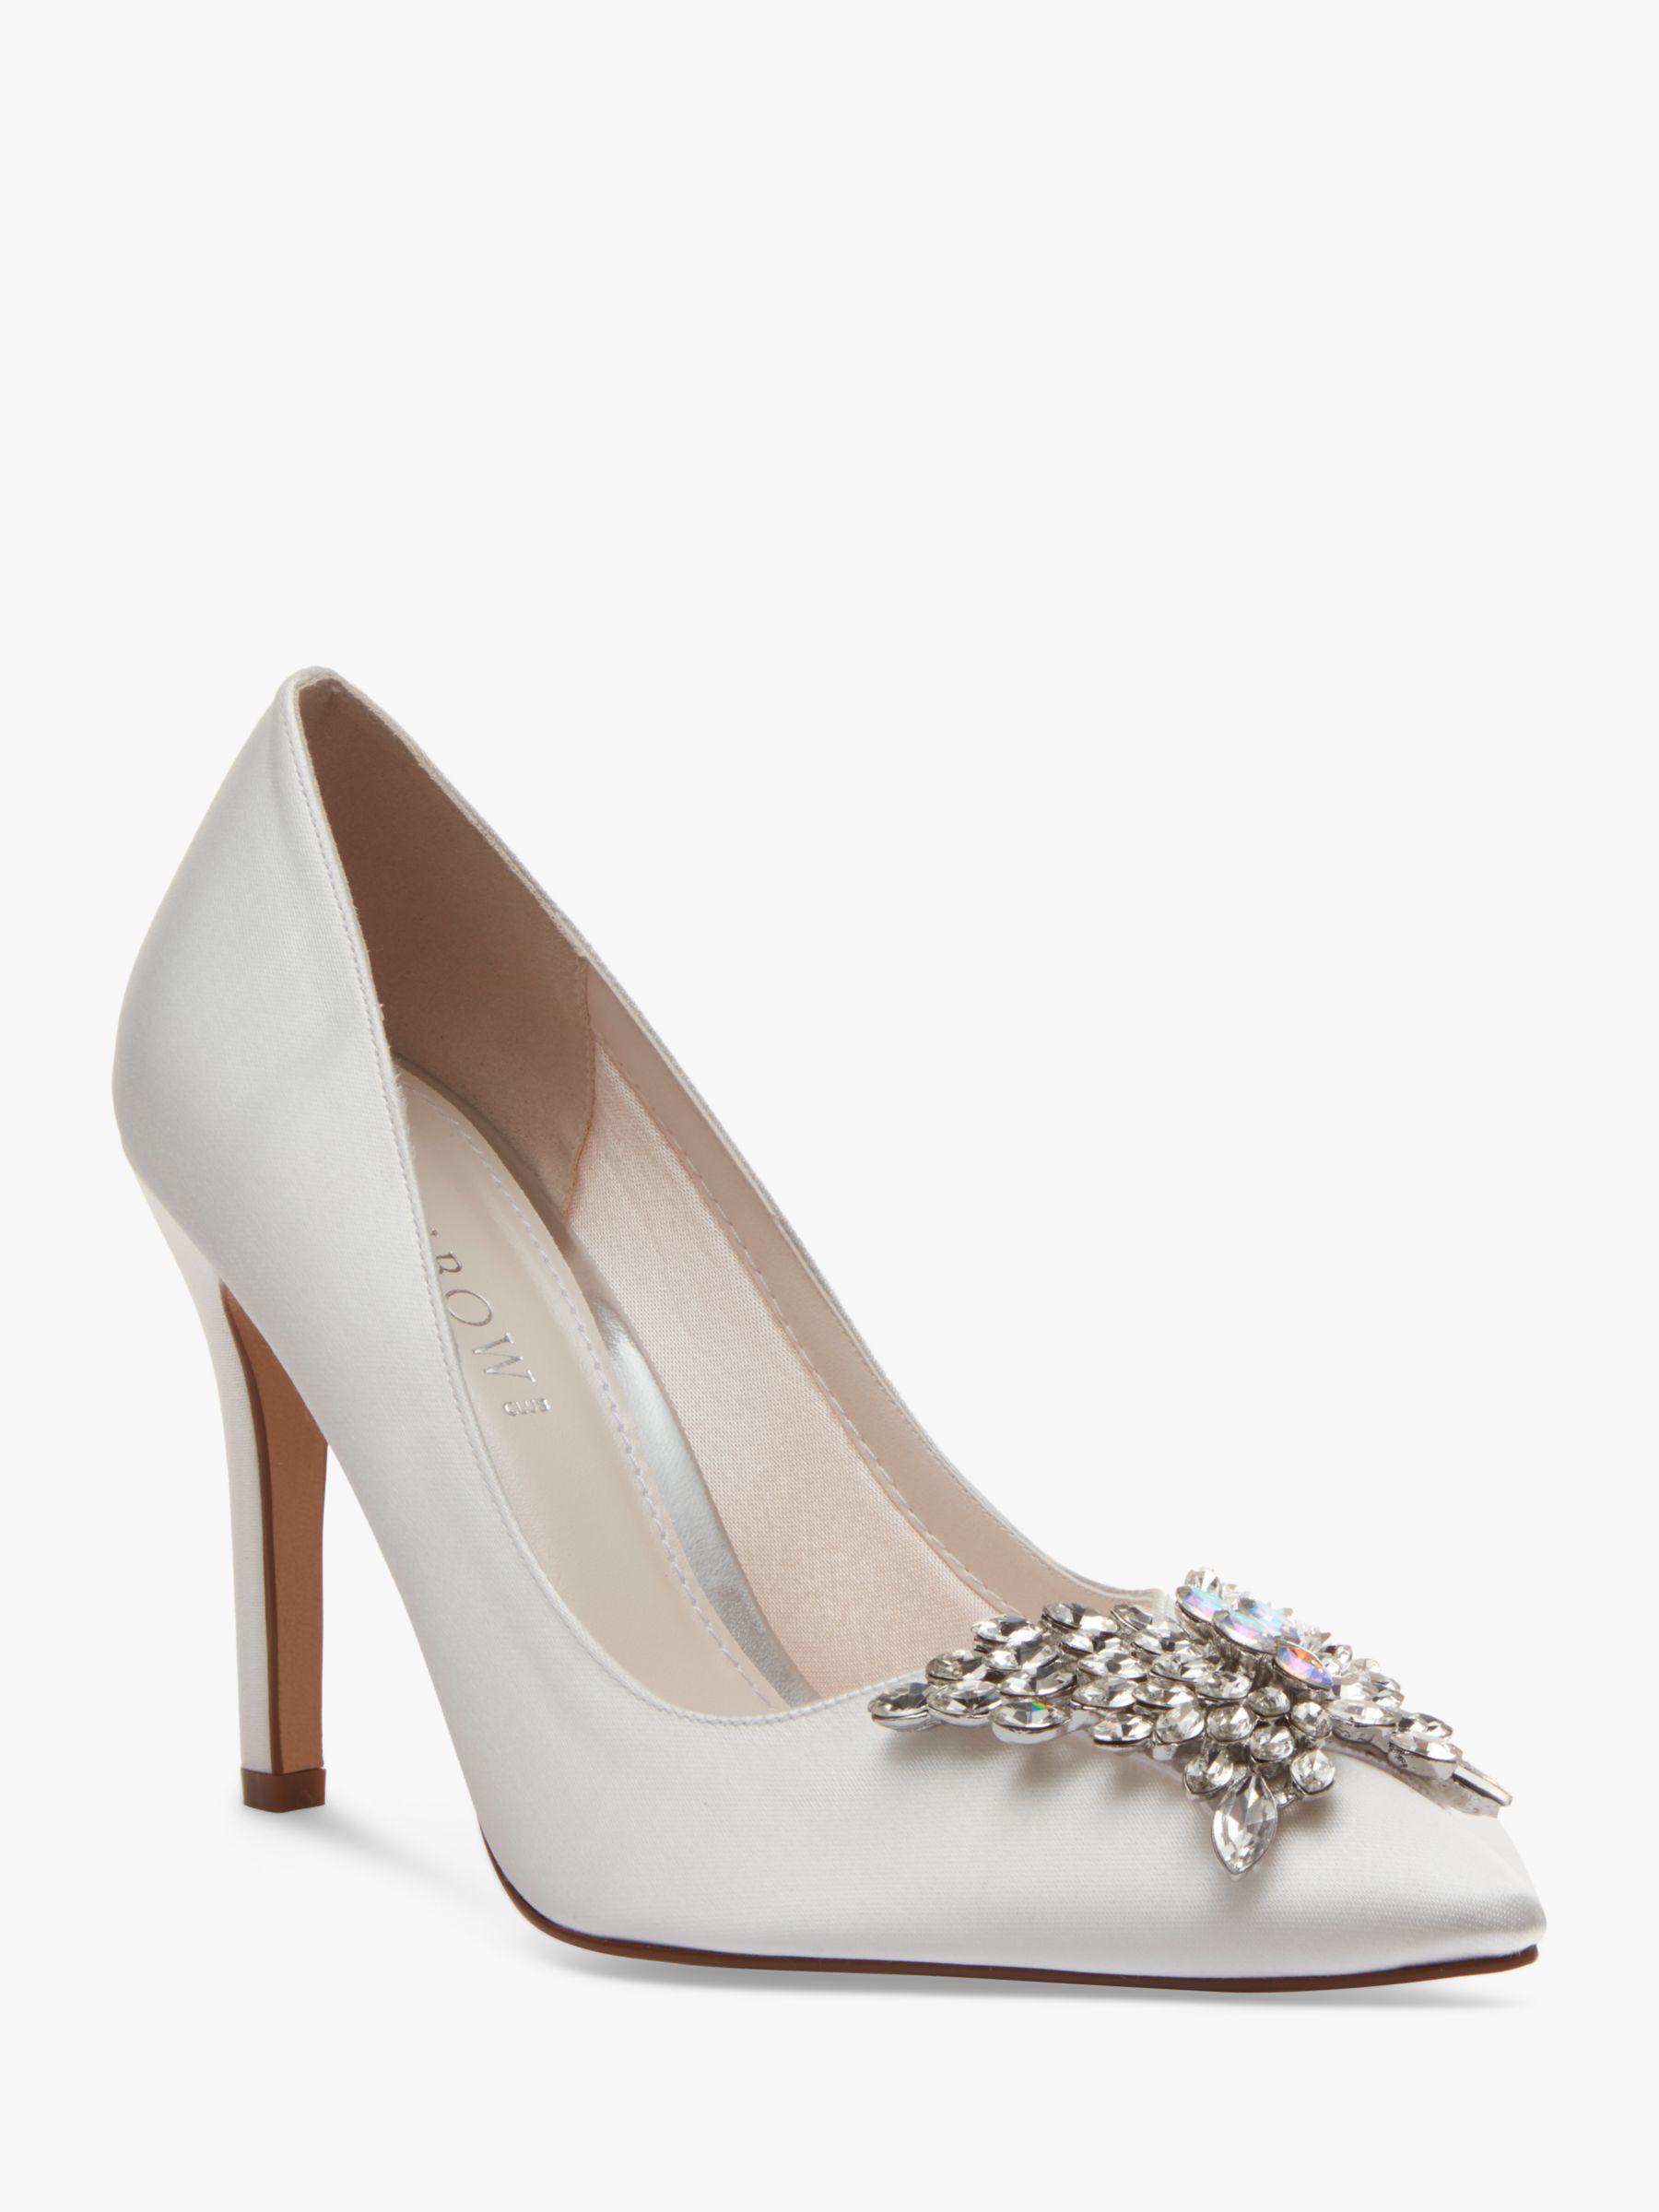 Rainbow Club Nelly Satin Jewel Court Shoes, Ivory at John Lewis & Partners